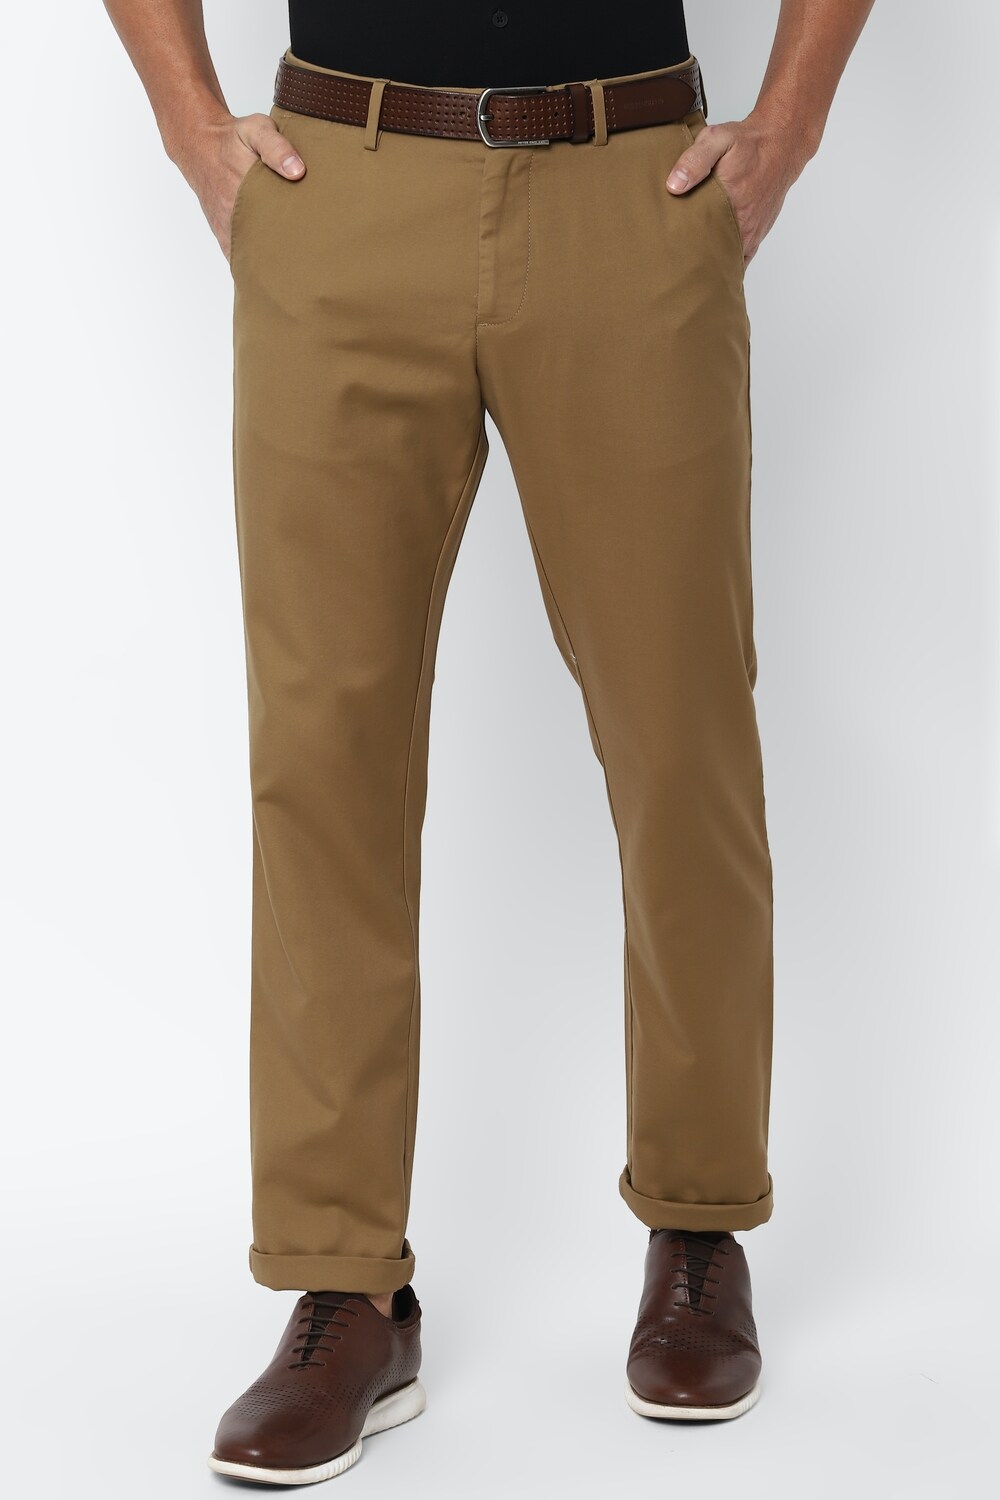 Regular Fit Trousers for Men  Buy Classic Fit Trousers Zodiac